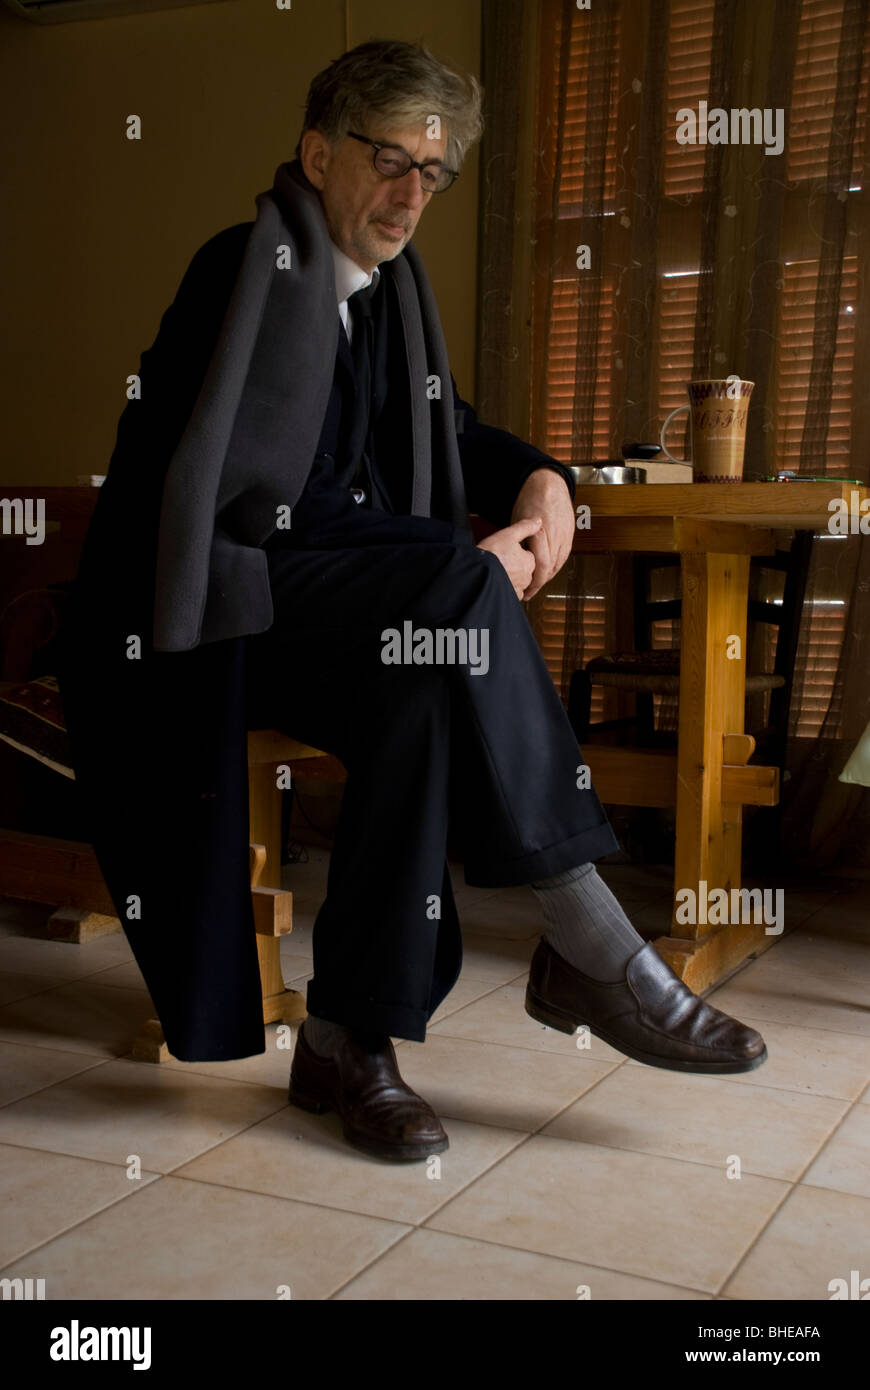 suited man sitting at a kitchen table Stock Photo